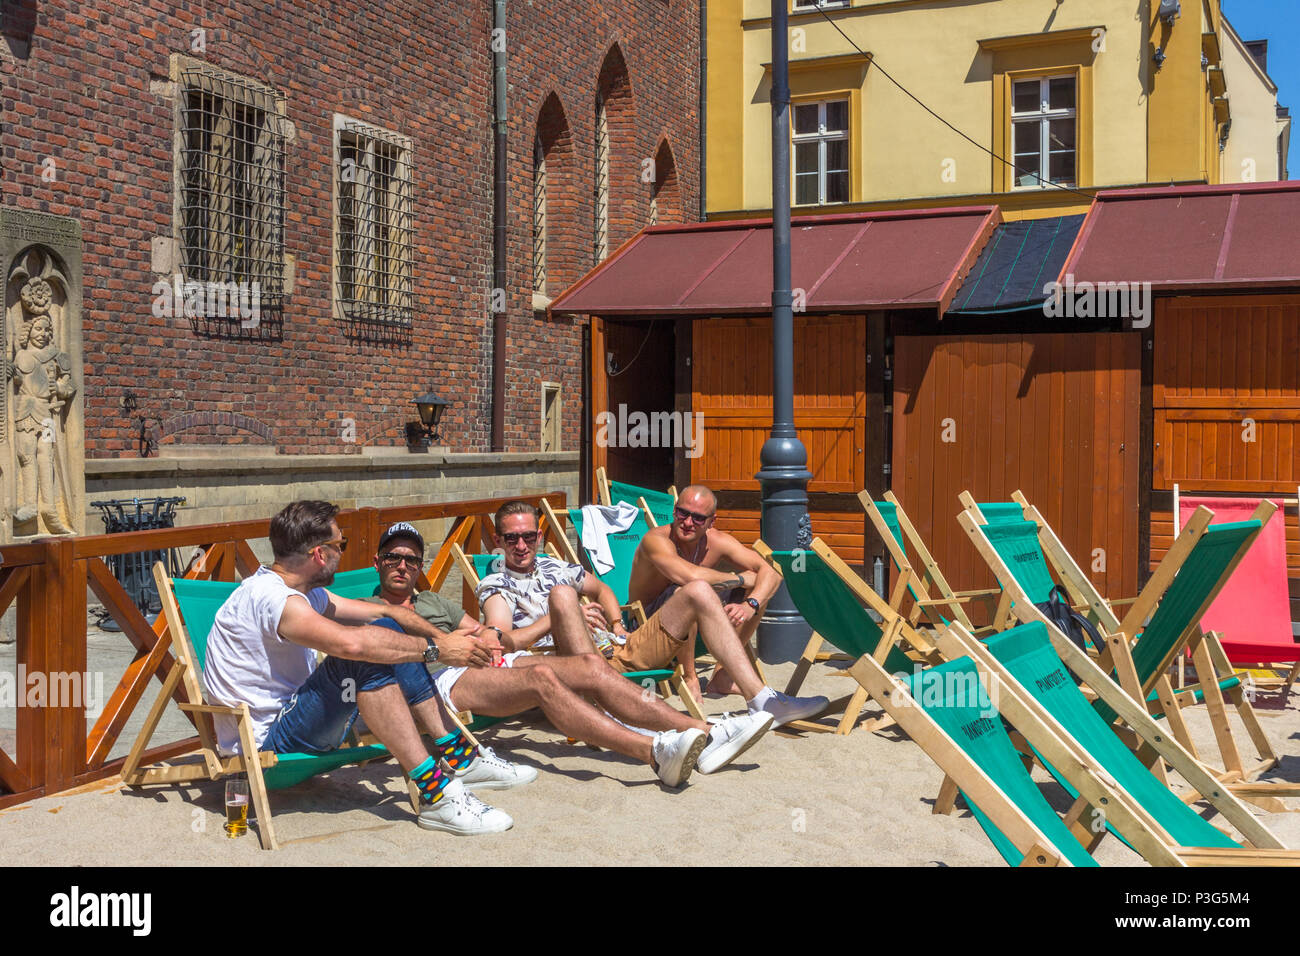 Locals and tourists relax on deckchairs in the sun on makeshift beach in the Market Square, Wrocław, Poland Stock Photo